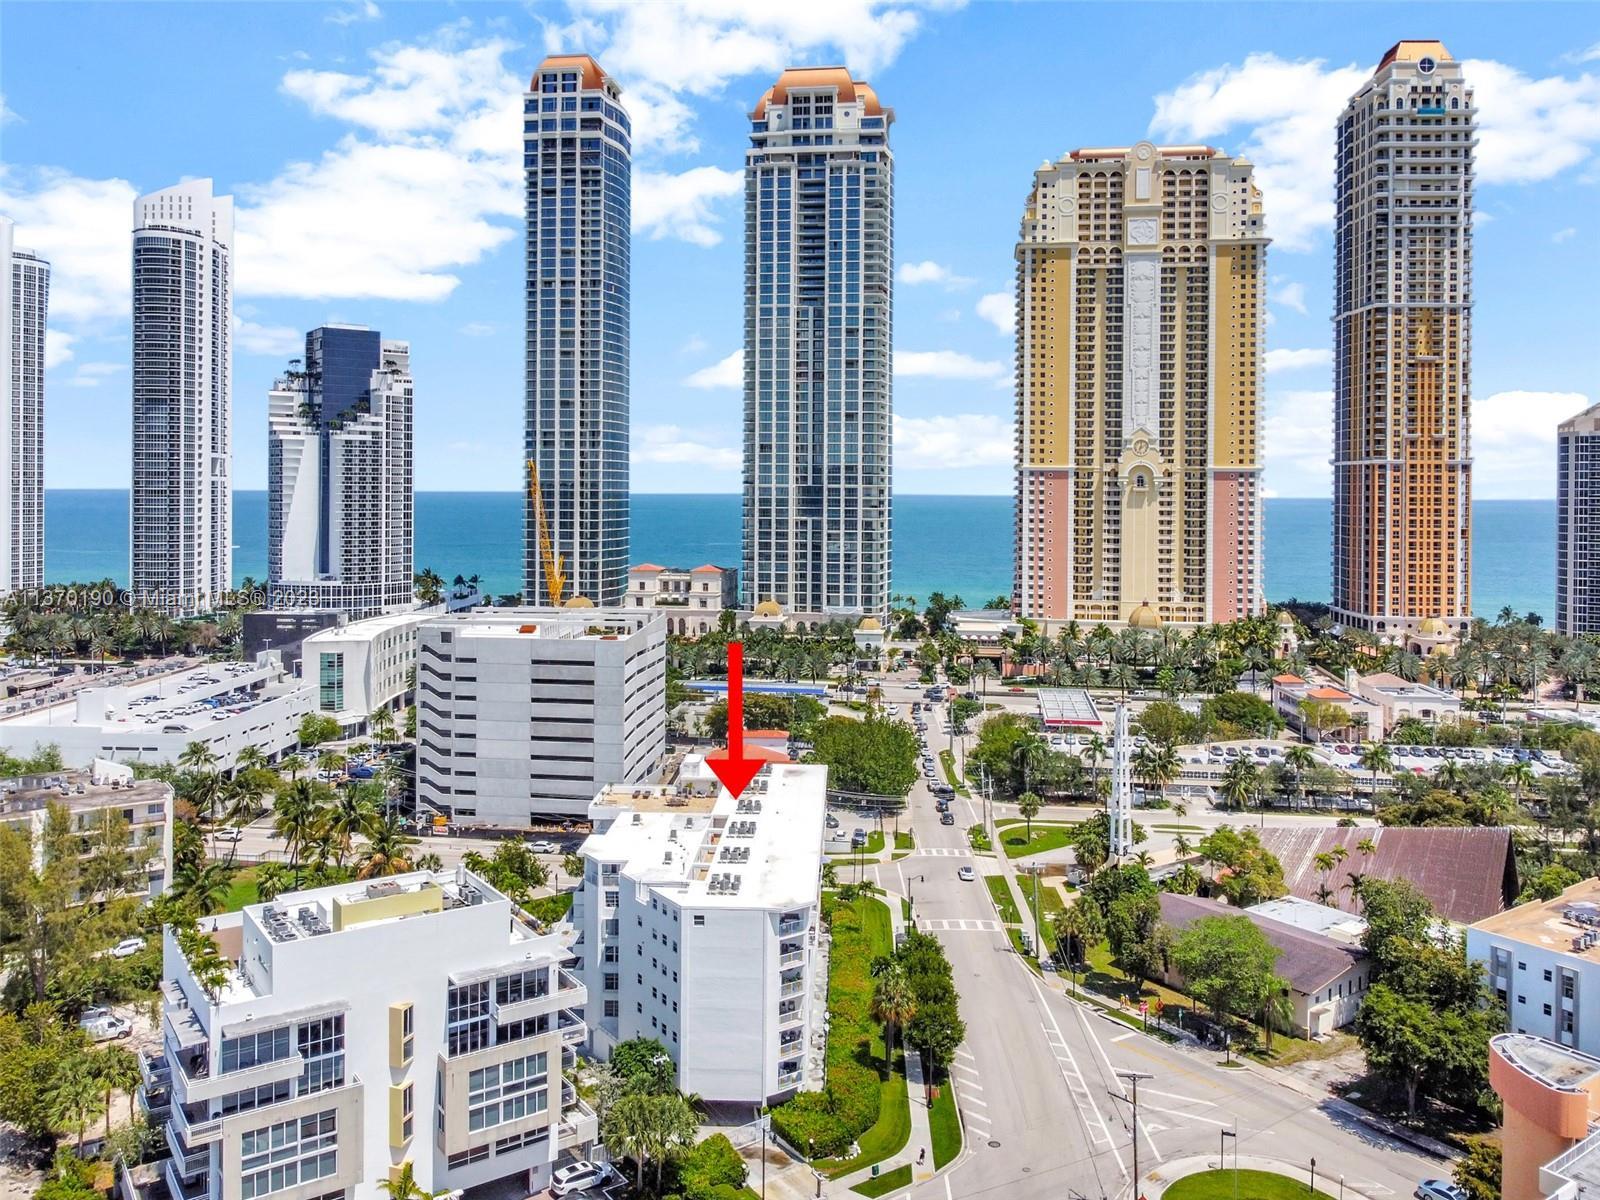 GORGEOUS CONDO IN SUNNY ISLES BEACH WALKING DISTANCE TO THE OCEAN  ENJOY PARADISE HOME . FEATURES 2 